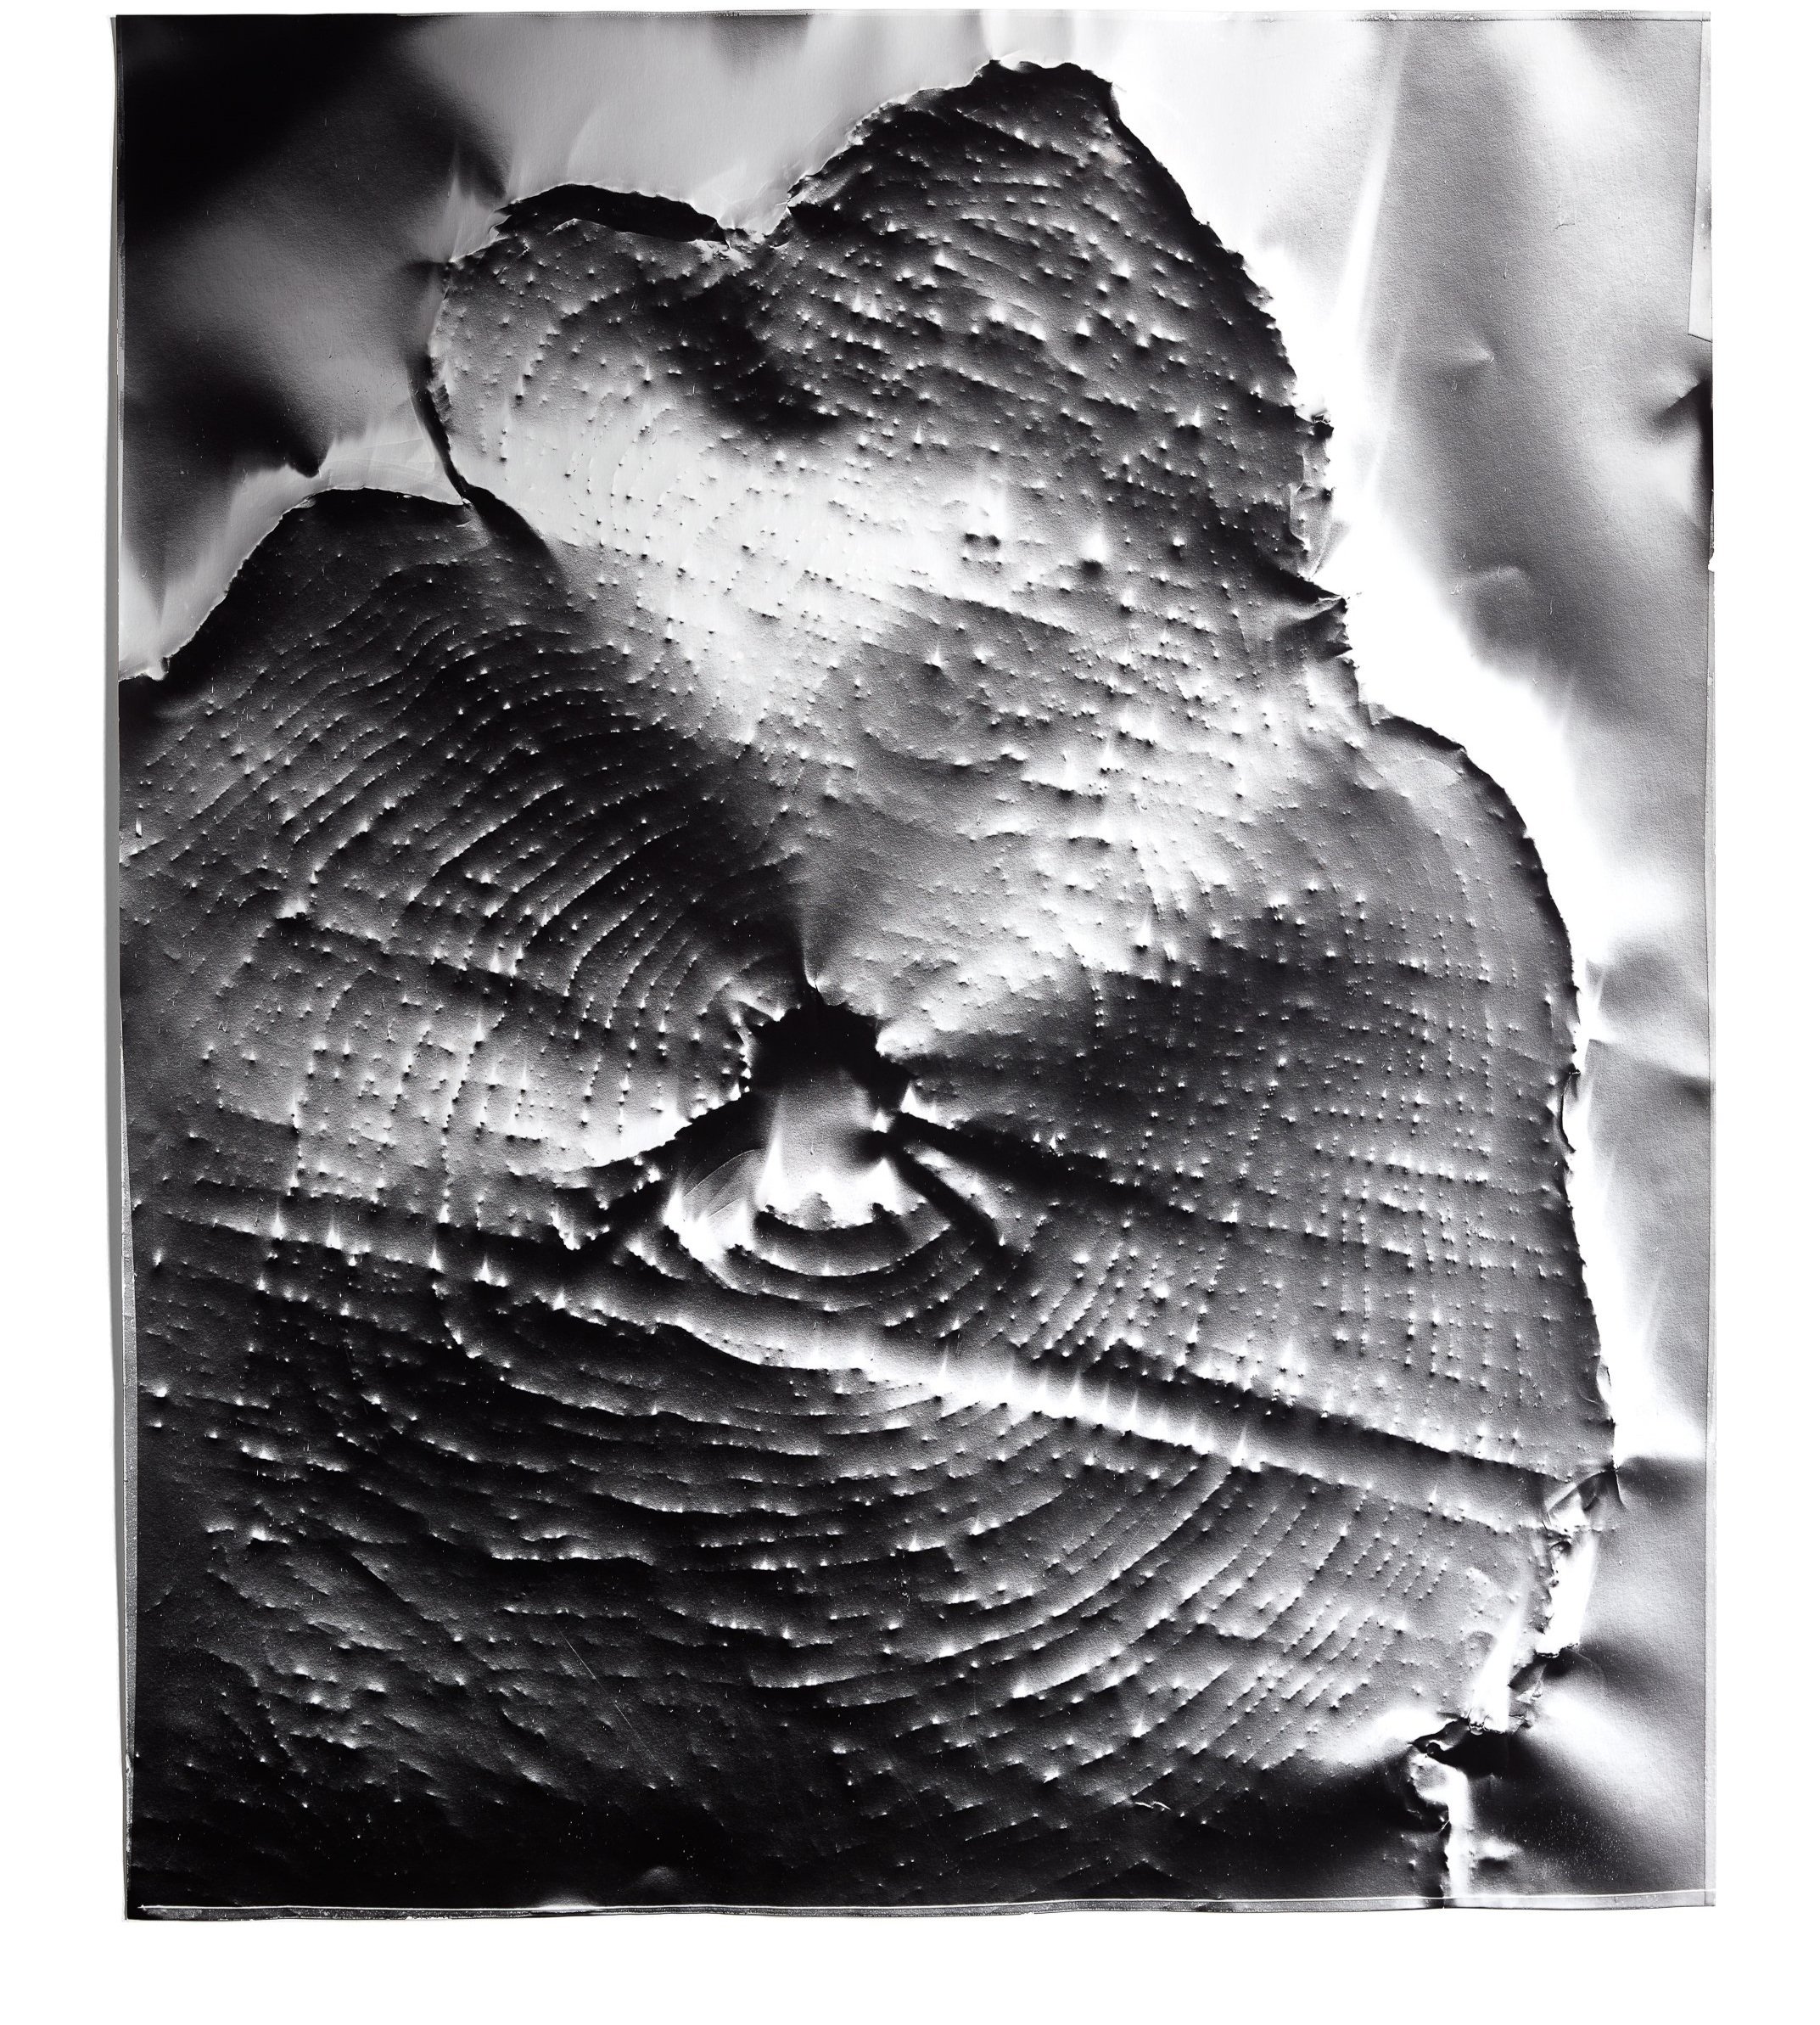   Automatic Earth 1,  2016 Photographic rubbing (embossed silver gelatin photogram) 24 x 20 in 